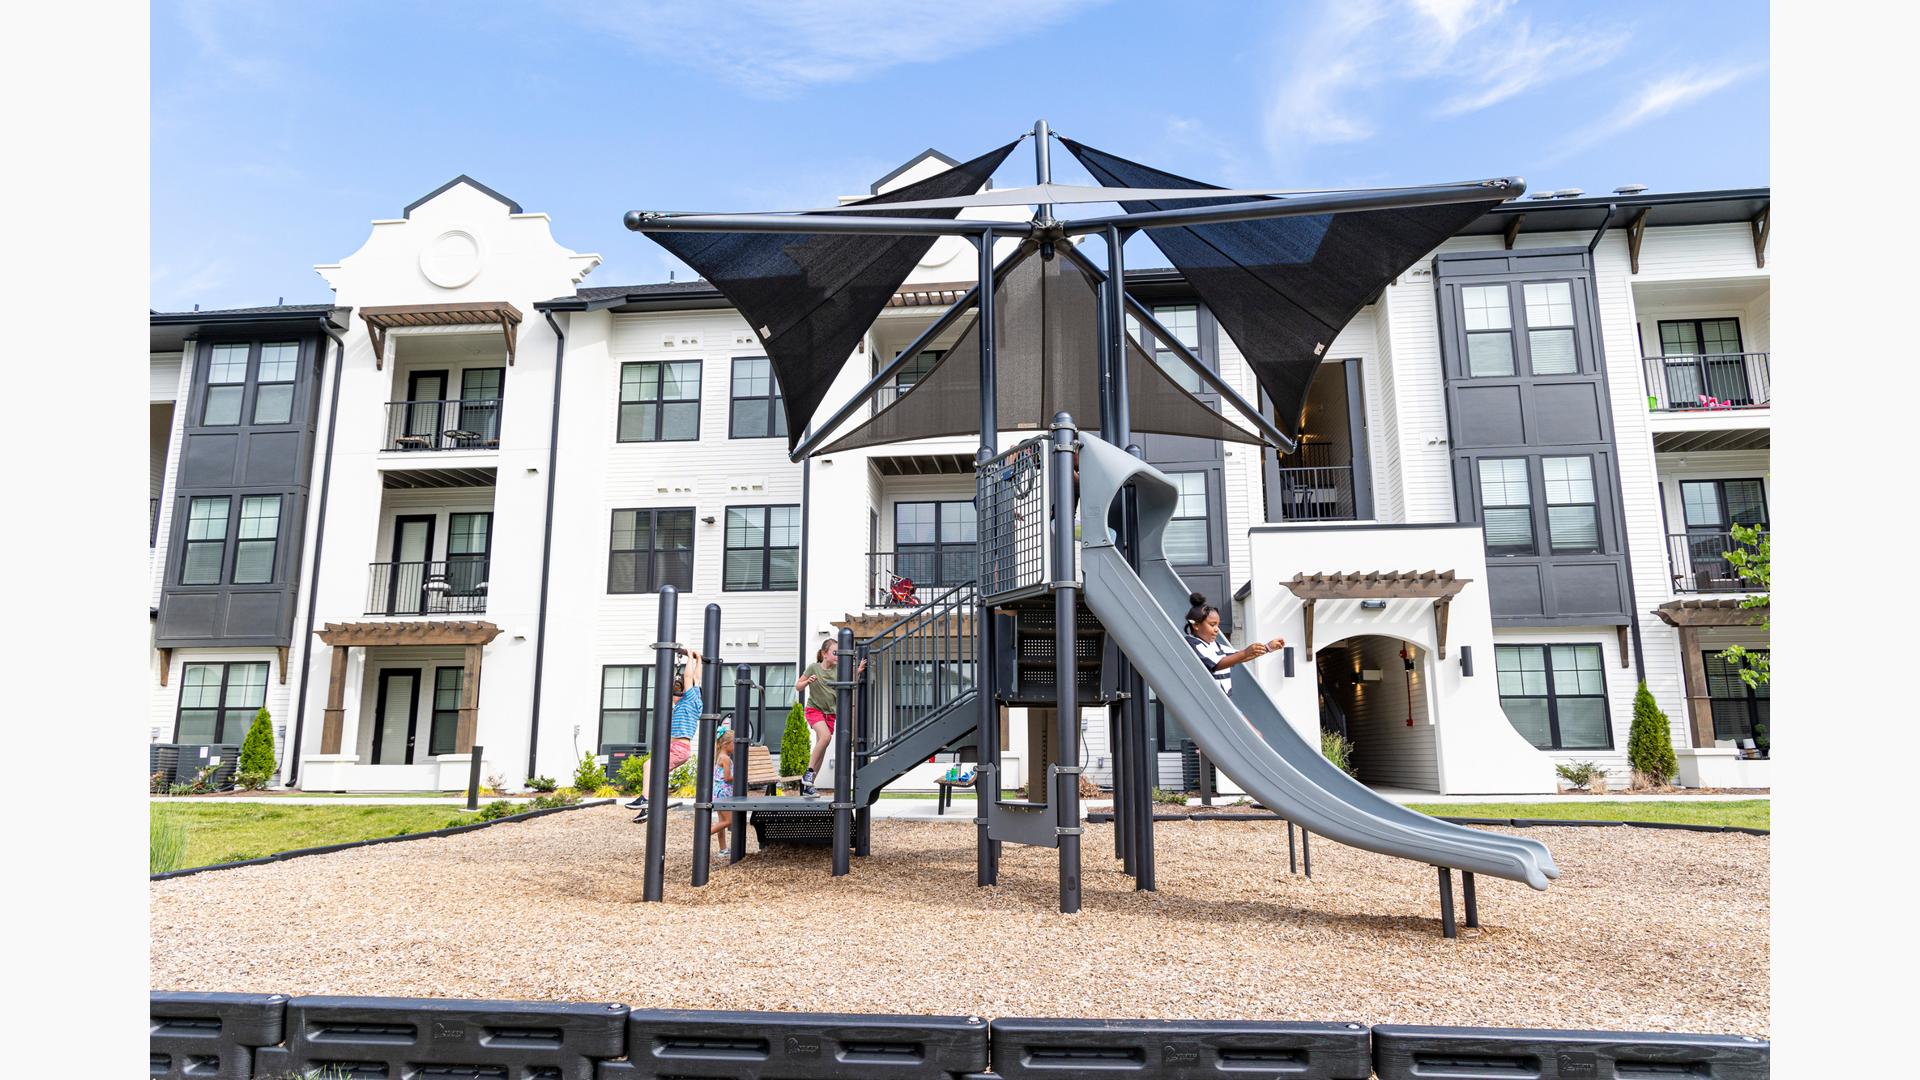 Children play on a playground structure with climbers slides, two tear decking, and shade system over head that sits next to an apartment building.